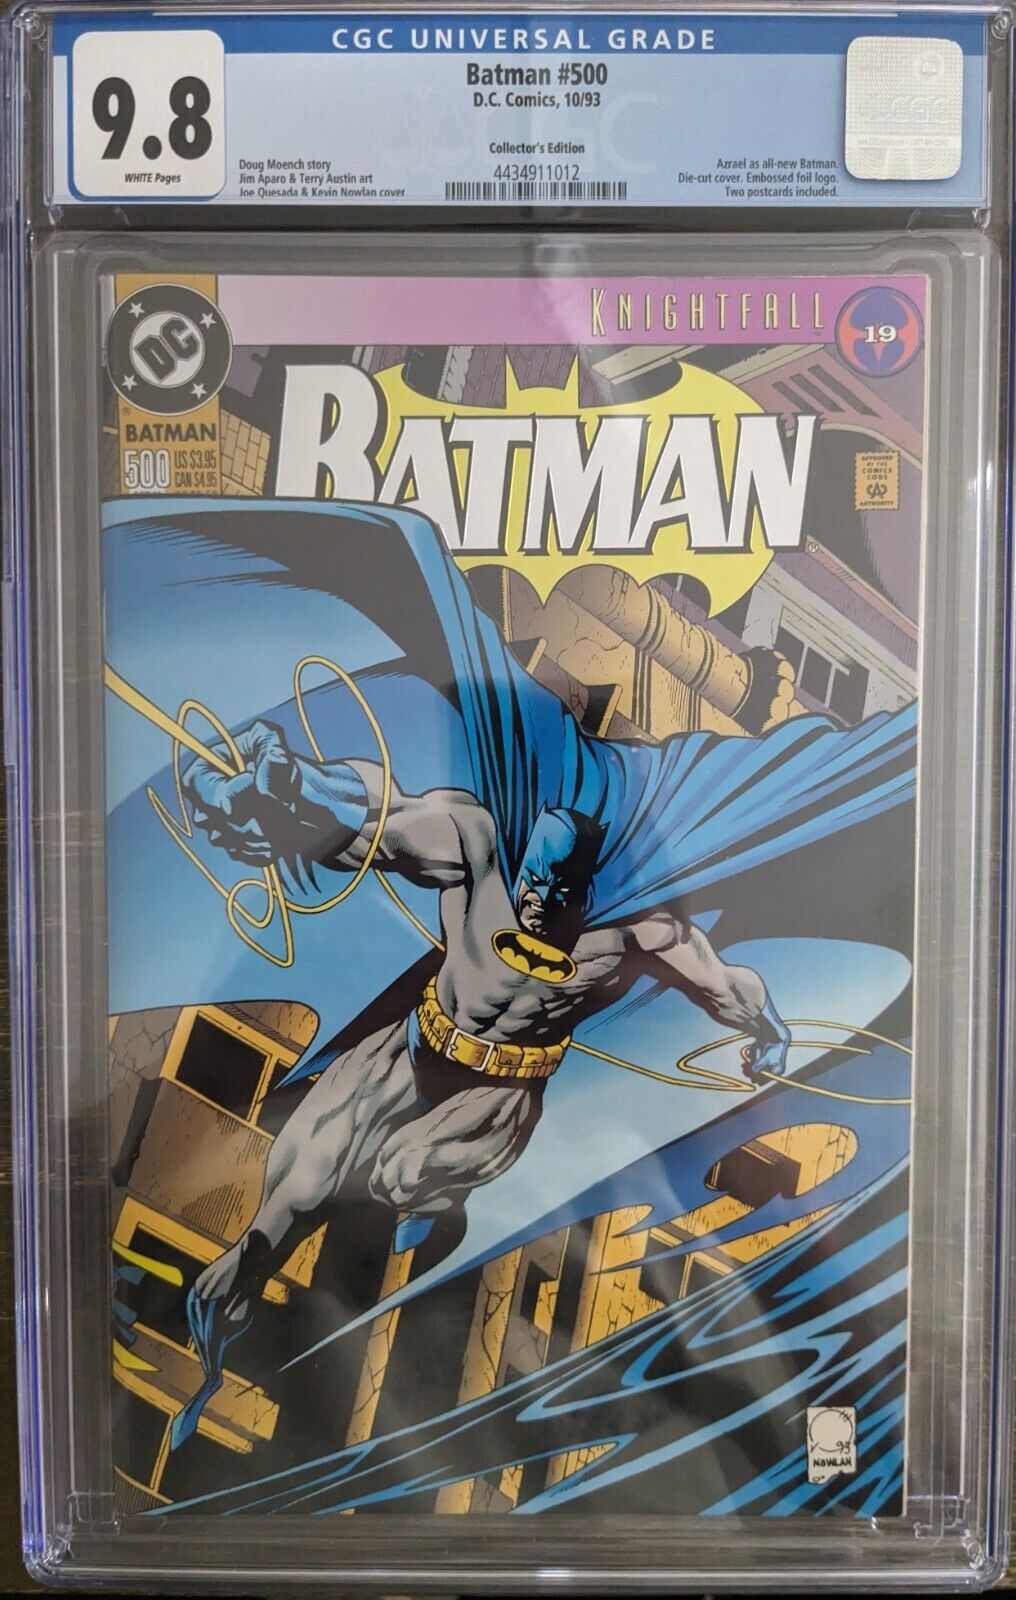 BATMAN #500 - CGC 9.8 - COLLECTOR\'S EDITION - DIE-CUT COVER EMBOSSED FOIL LOGO